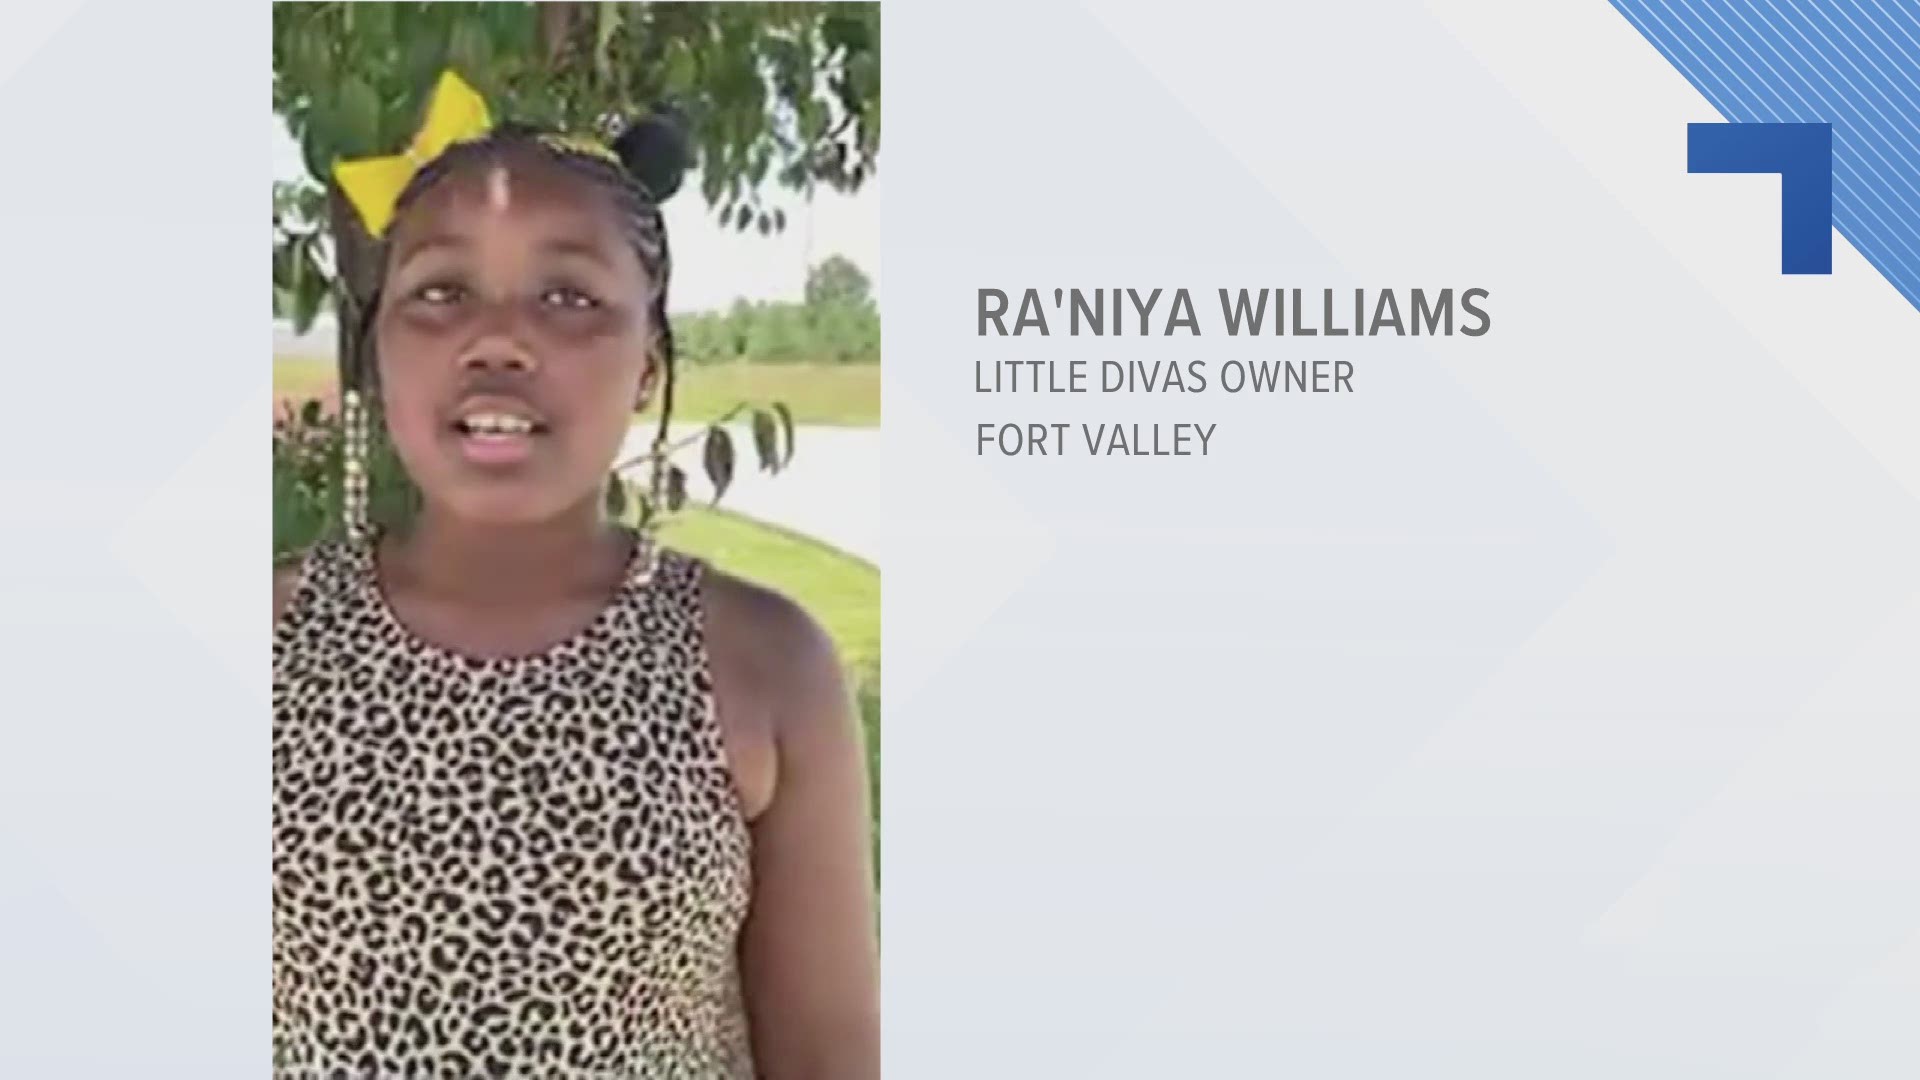 A pair of sisters in Fort Valley are now new business owners. Ra’Niya Williams and her sister Zoè sell purses, sunglasses, lip gloss and other accessories for kids.